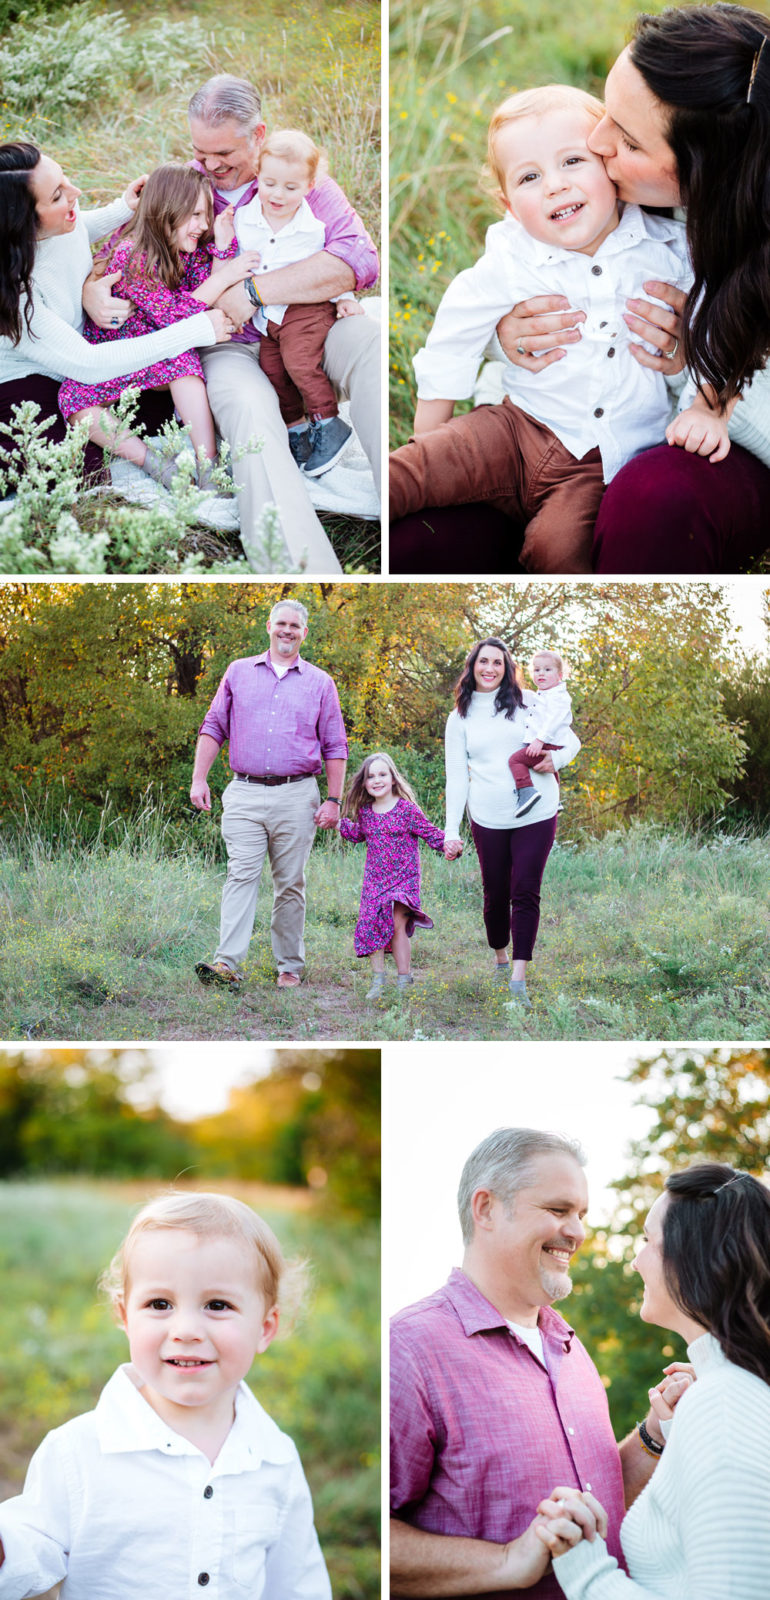 2020 Fall Family Mini Sessions in Plano offered by Erica Grandin Photography